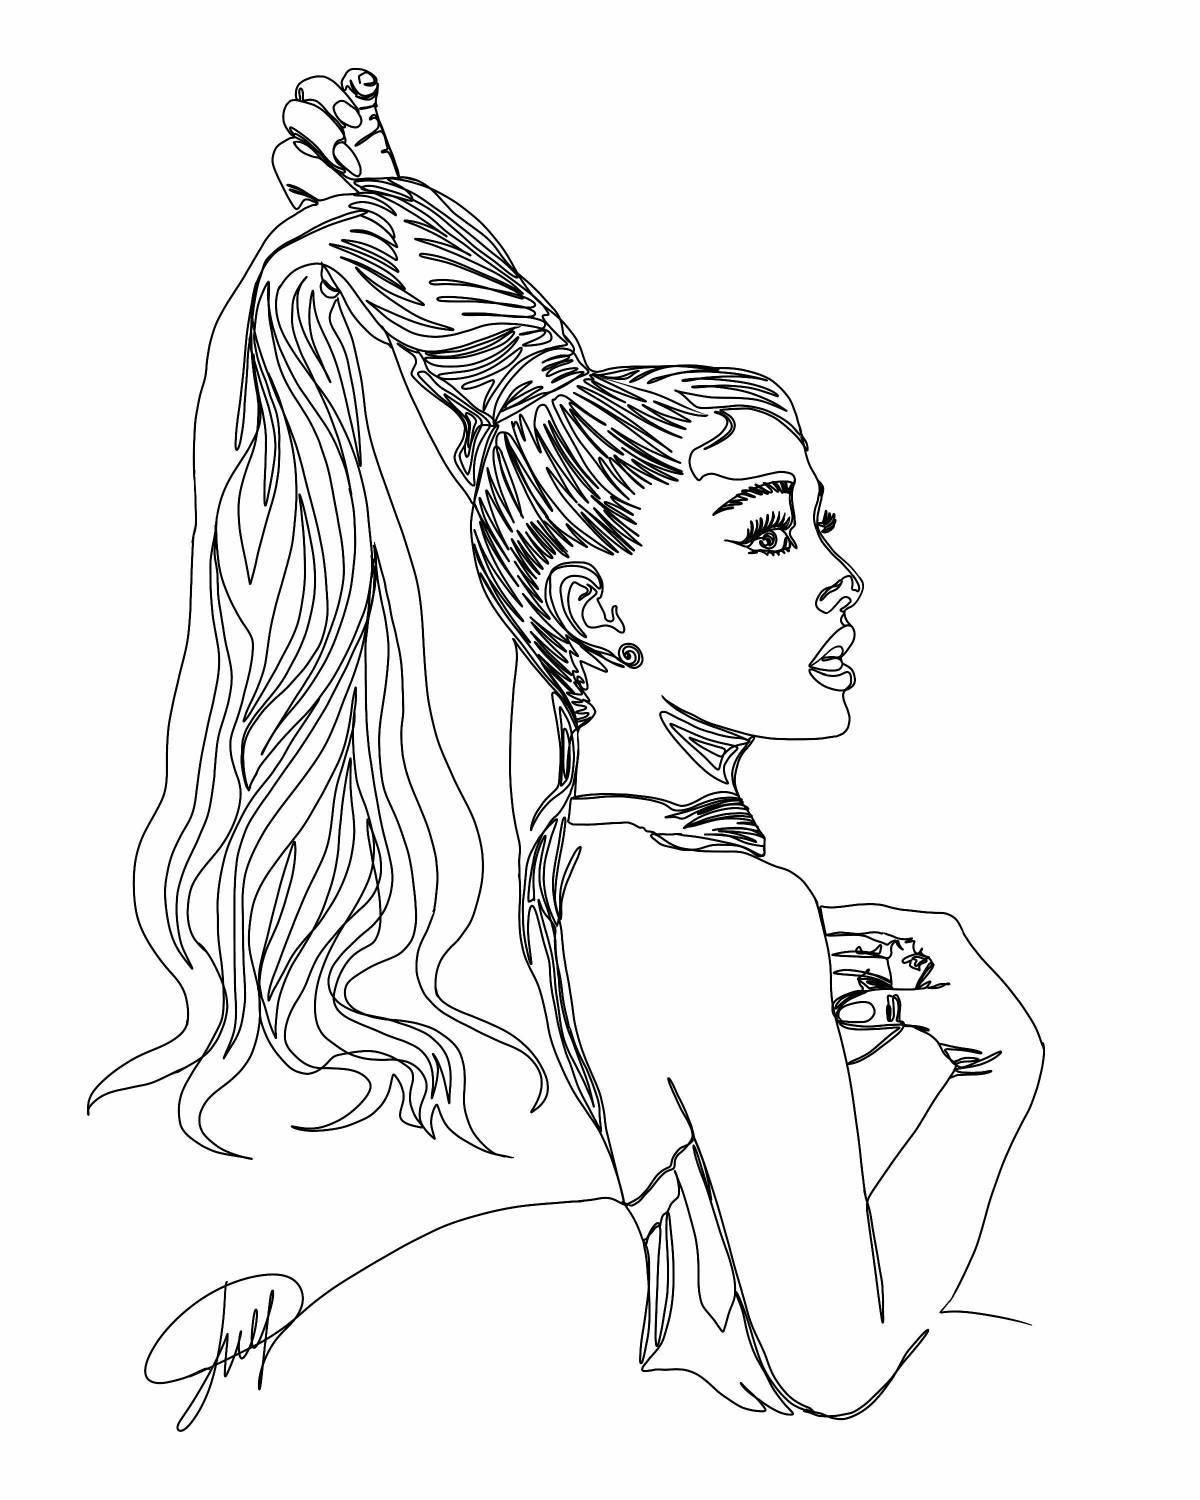 Colorful ariana grande coloring page